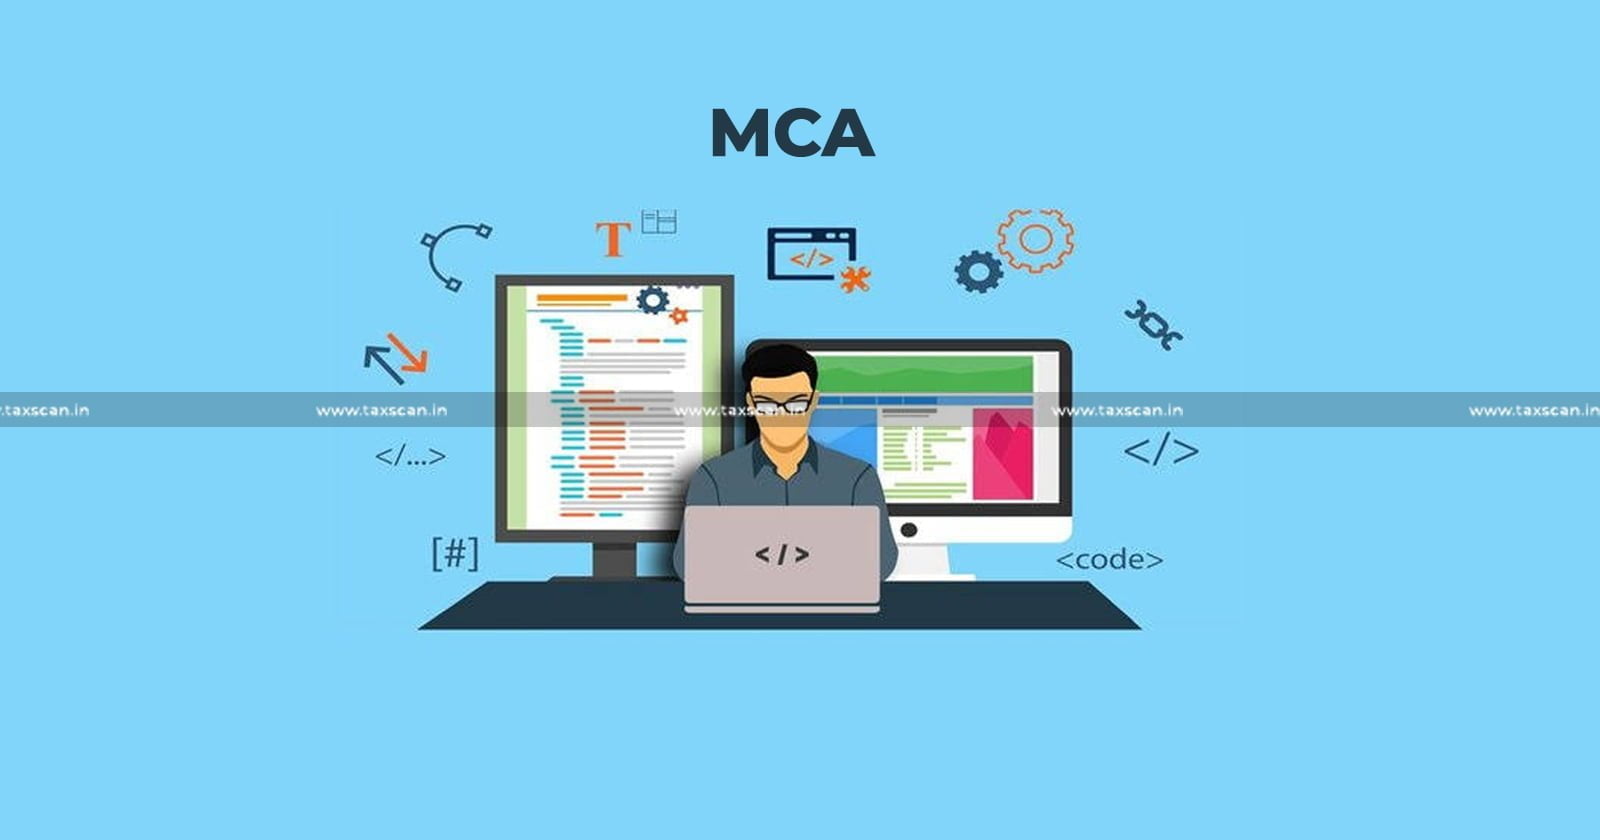 MCA - Digital Competition - Digital Competition Laws - Committee report - taxscan